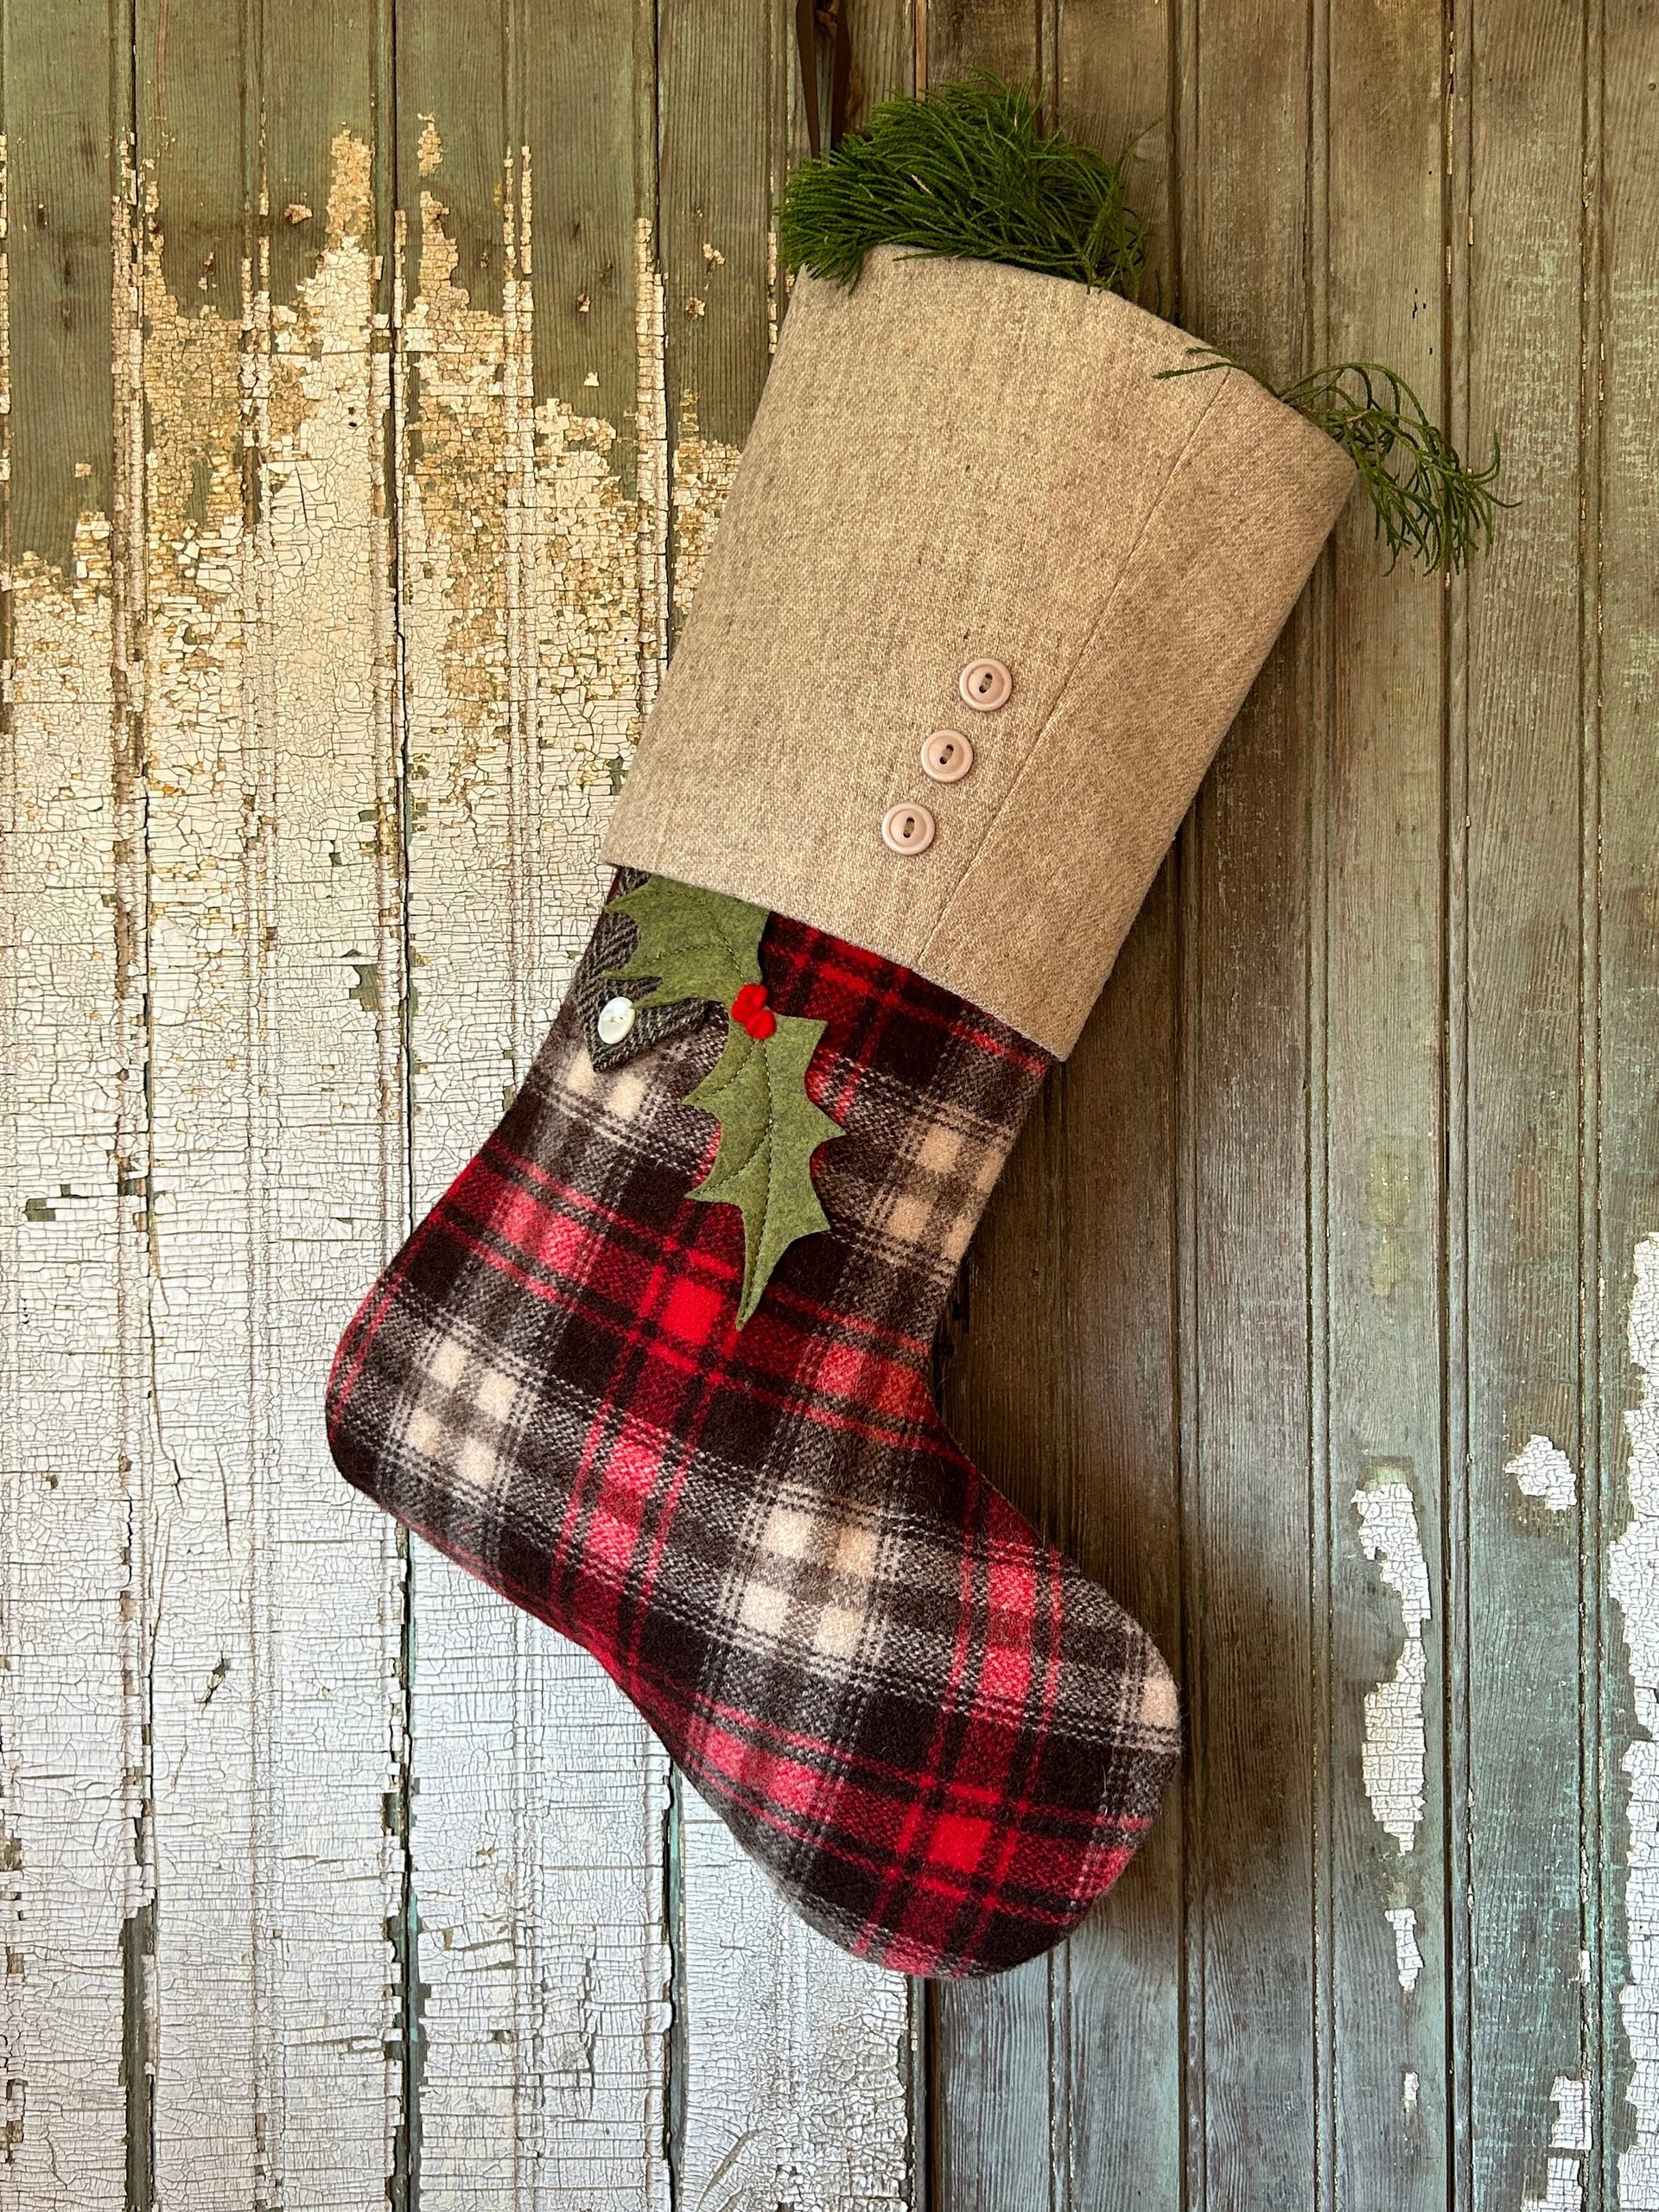 Lumberjack Plaid Christmas Stocking with Holly Leaves